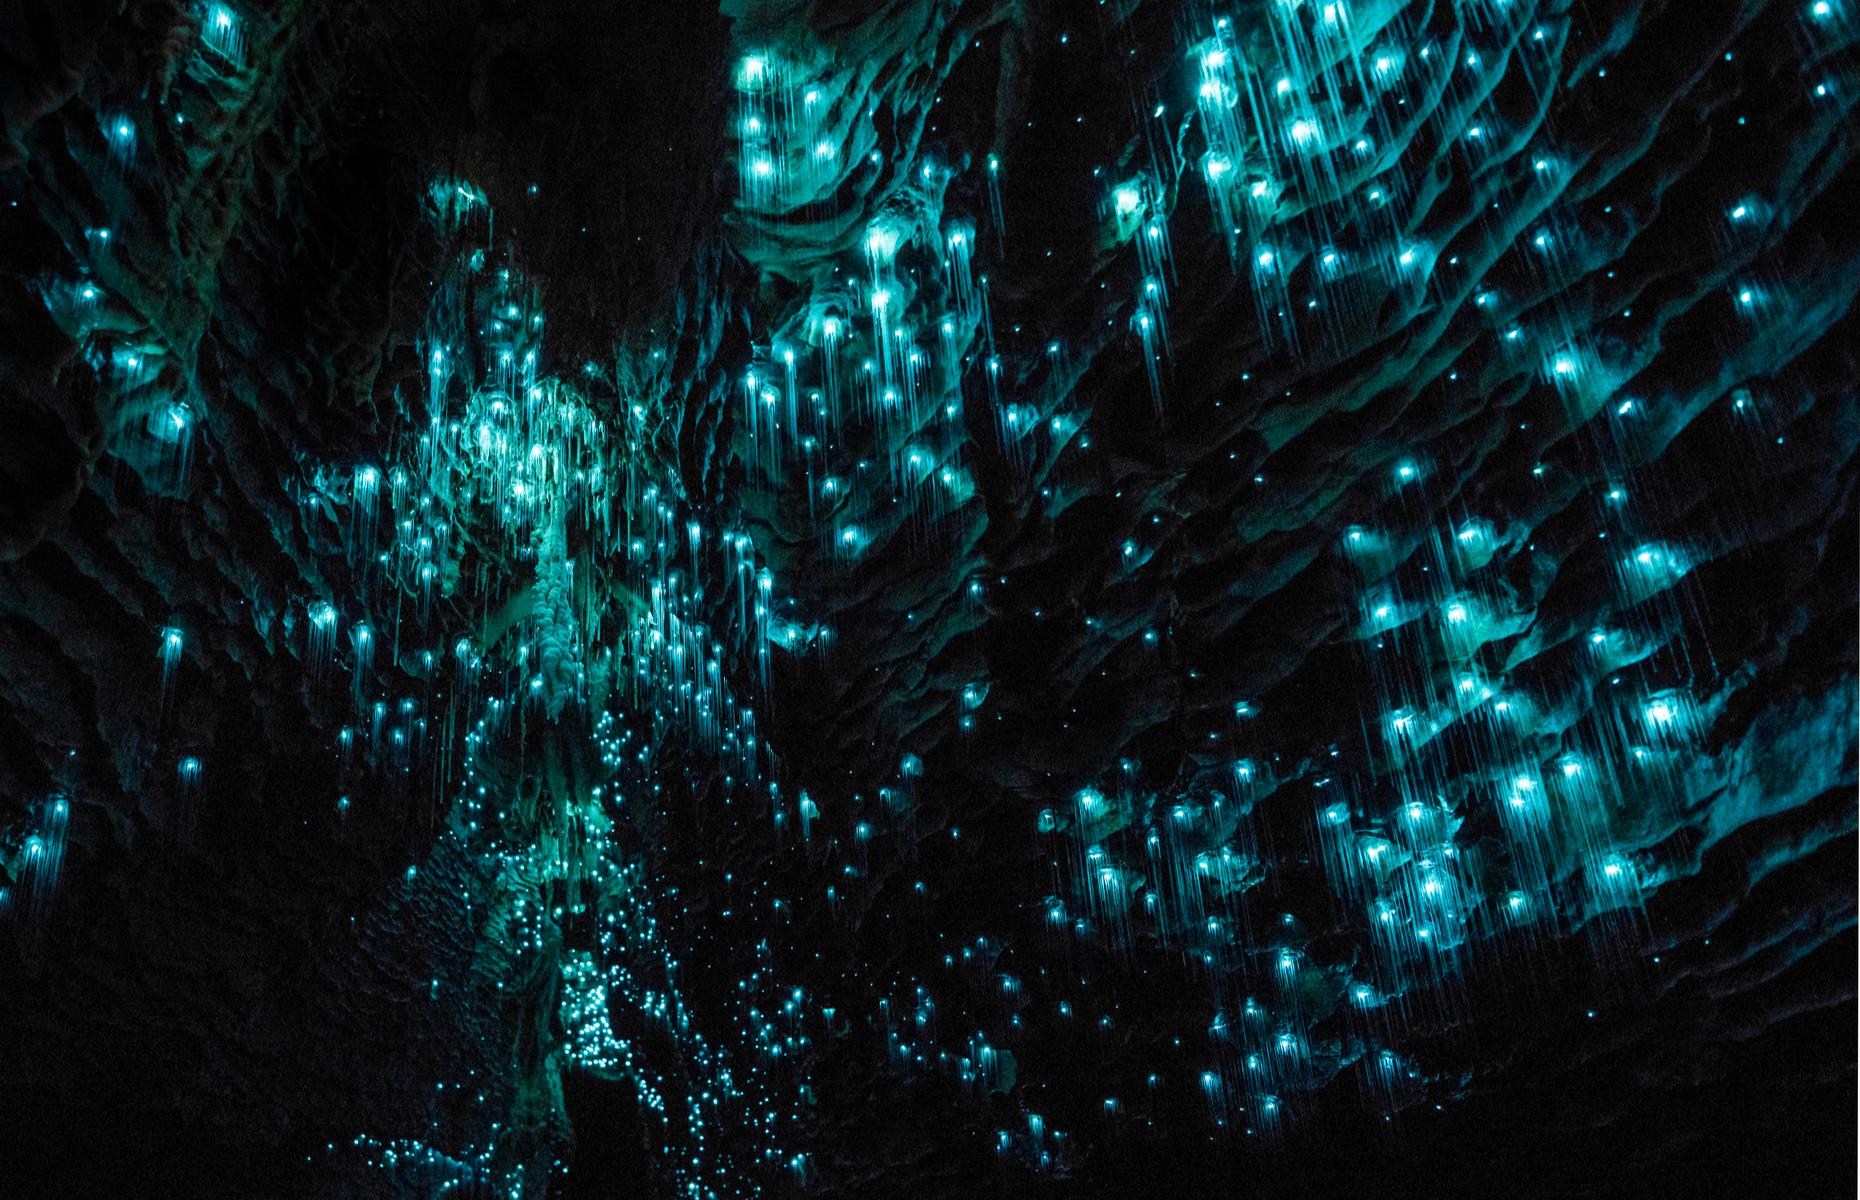 <p>The Waitomo region on the North Island has plenty of limestone caves to explore and a boat ride through the dimly lit Waitomo Glowworm Caves is unmissable. Gliding along in silence with the cavern lit by what looks like thousands of stars is a magical experience.</p>  <p><strong><a href="https://www.loveexploring.com/galleries/74880/the-worlds-most-incredible-caves-caverns?page=1">The world's most beautiful caverns and caves</a></strong> </p>